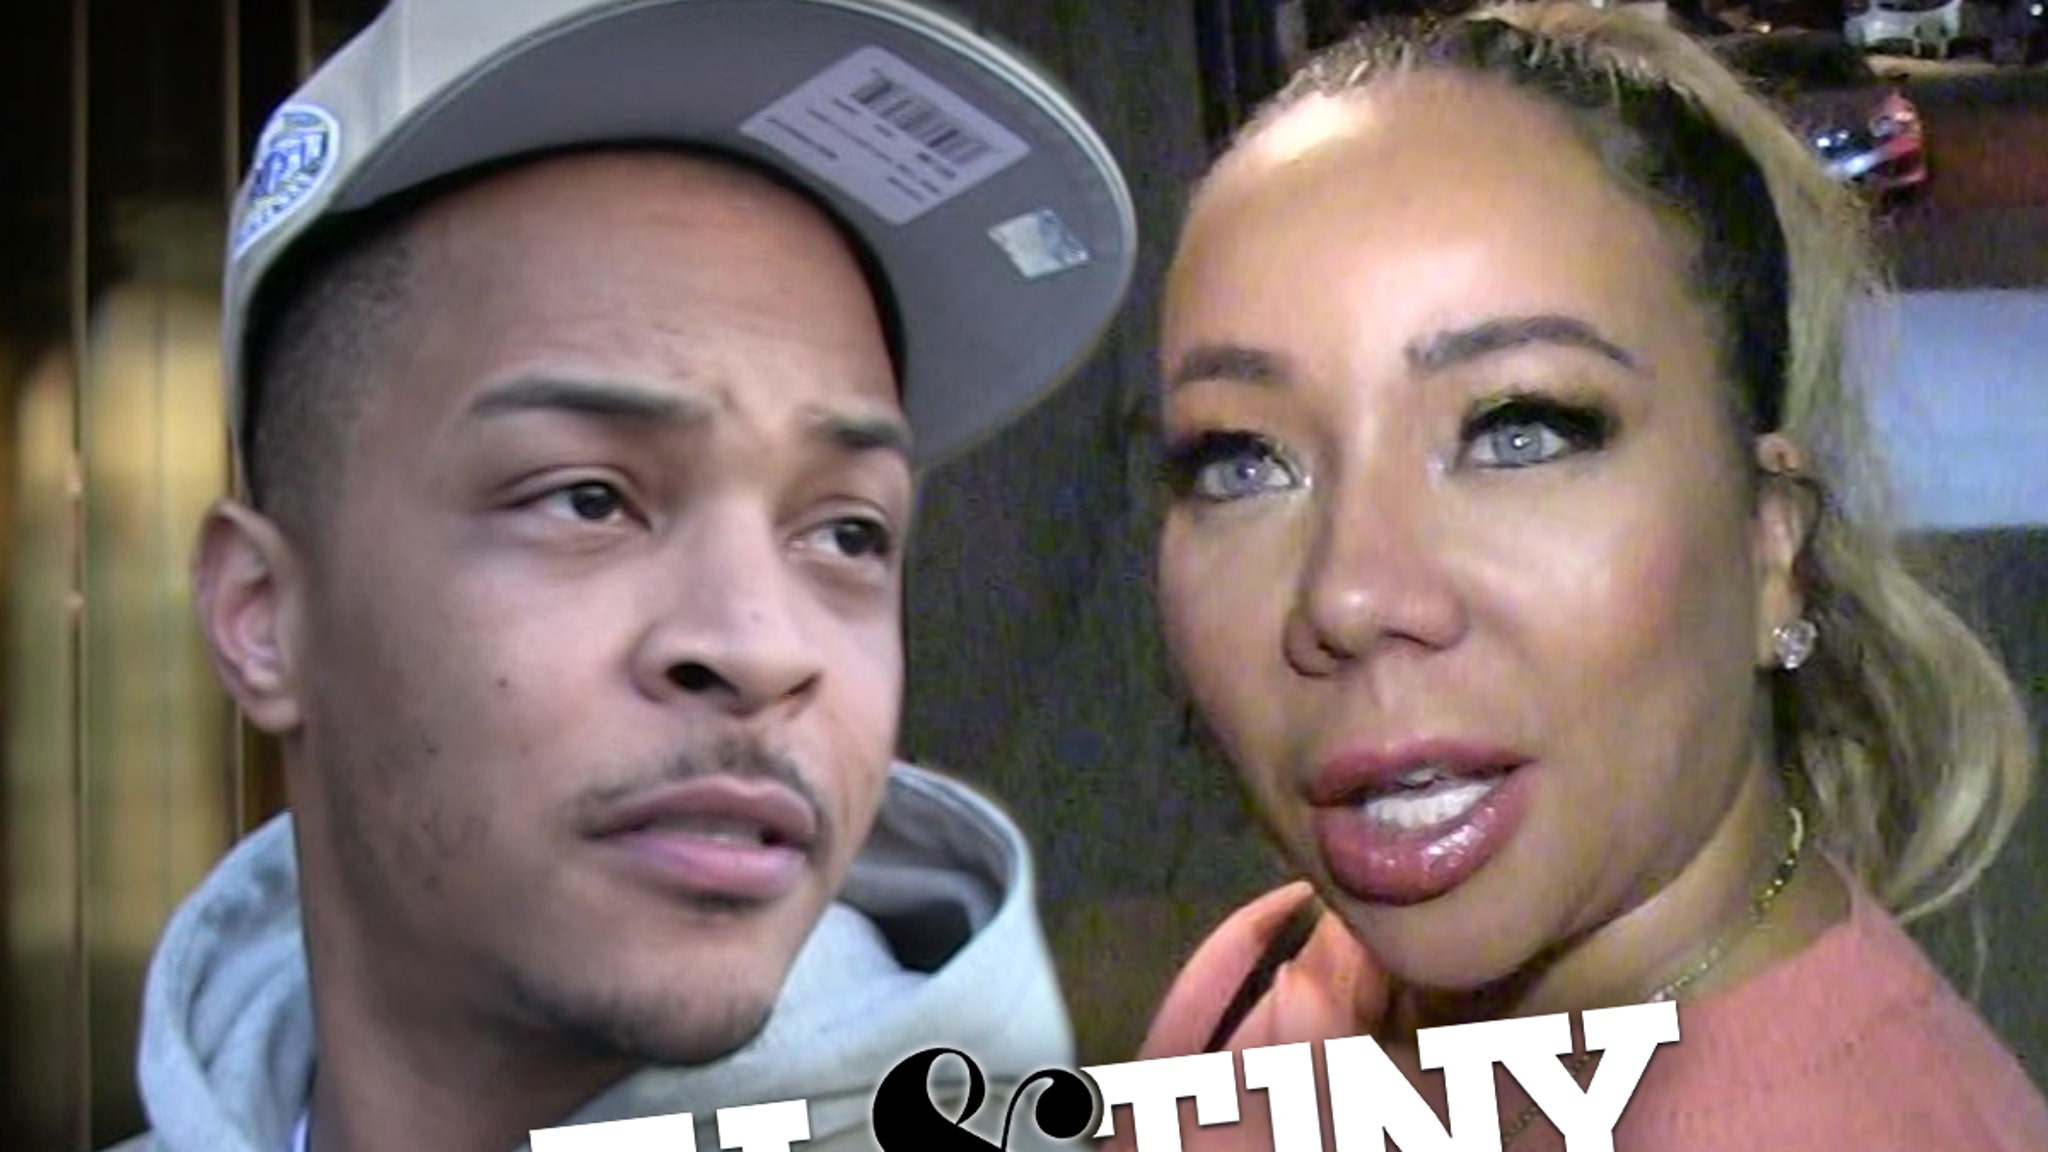 TI’s Reality Show Interrupts Production After Sexual Abuse Allegations